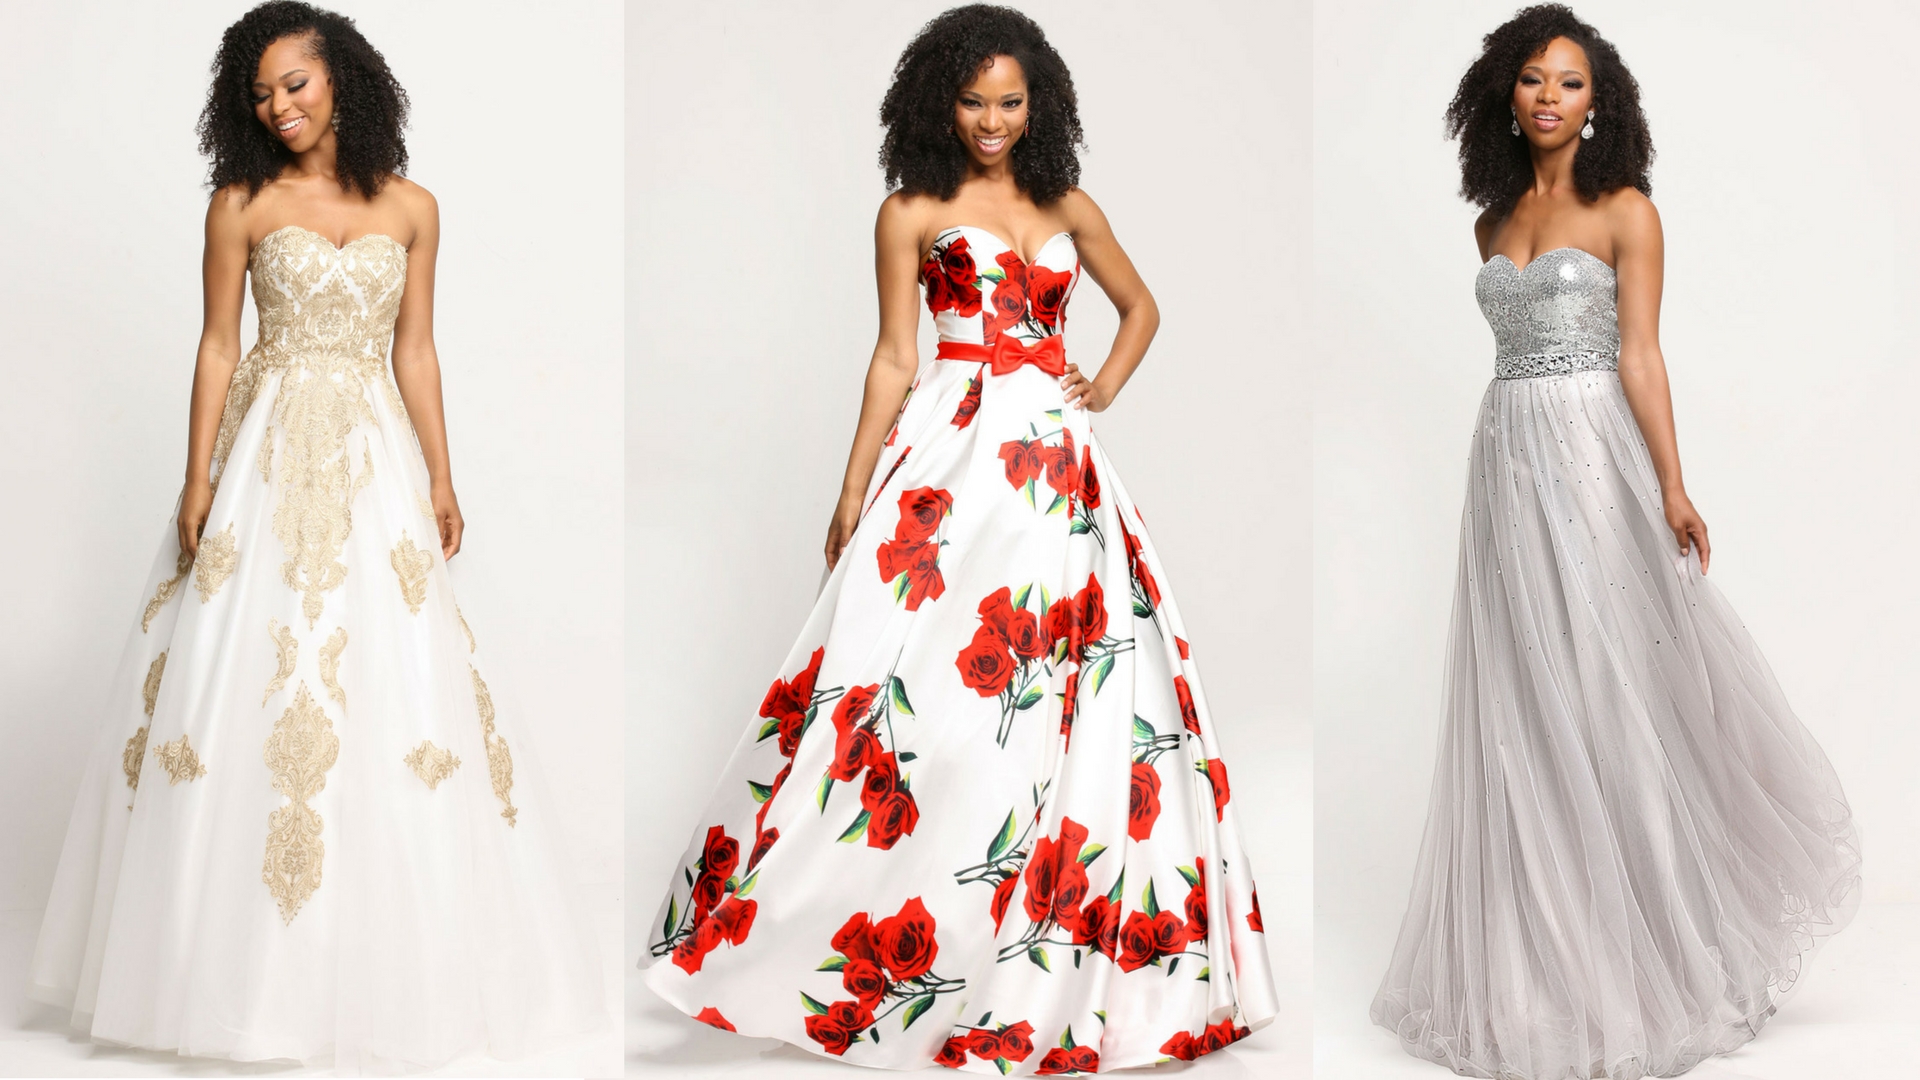 Some Enchanted Evening: 8 Amazing After-Five Designs for Prom 2017